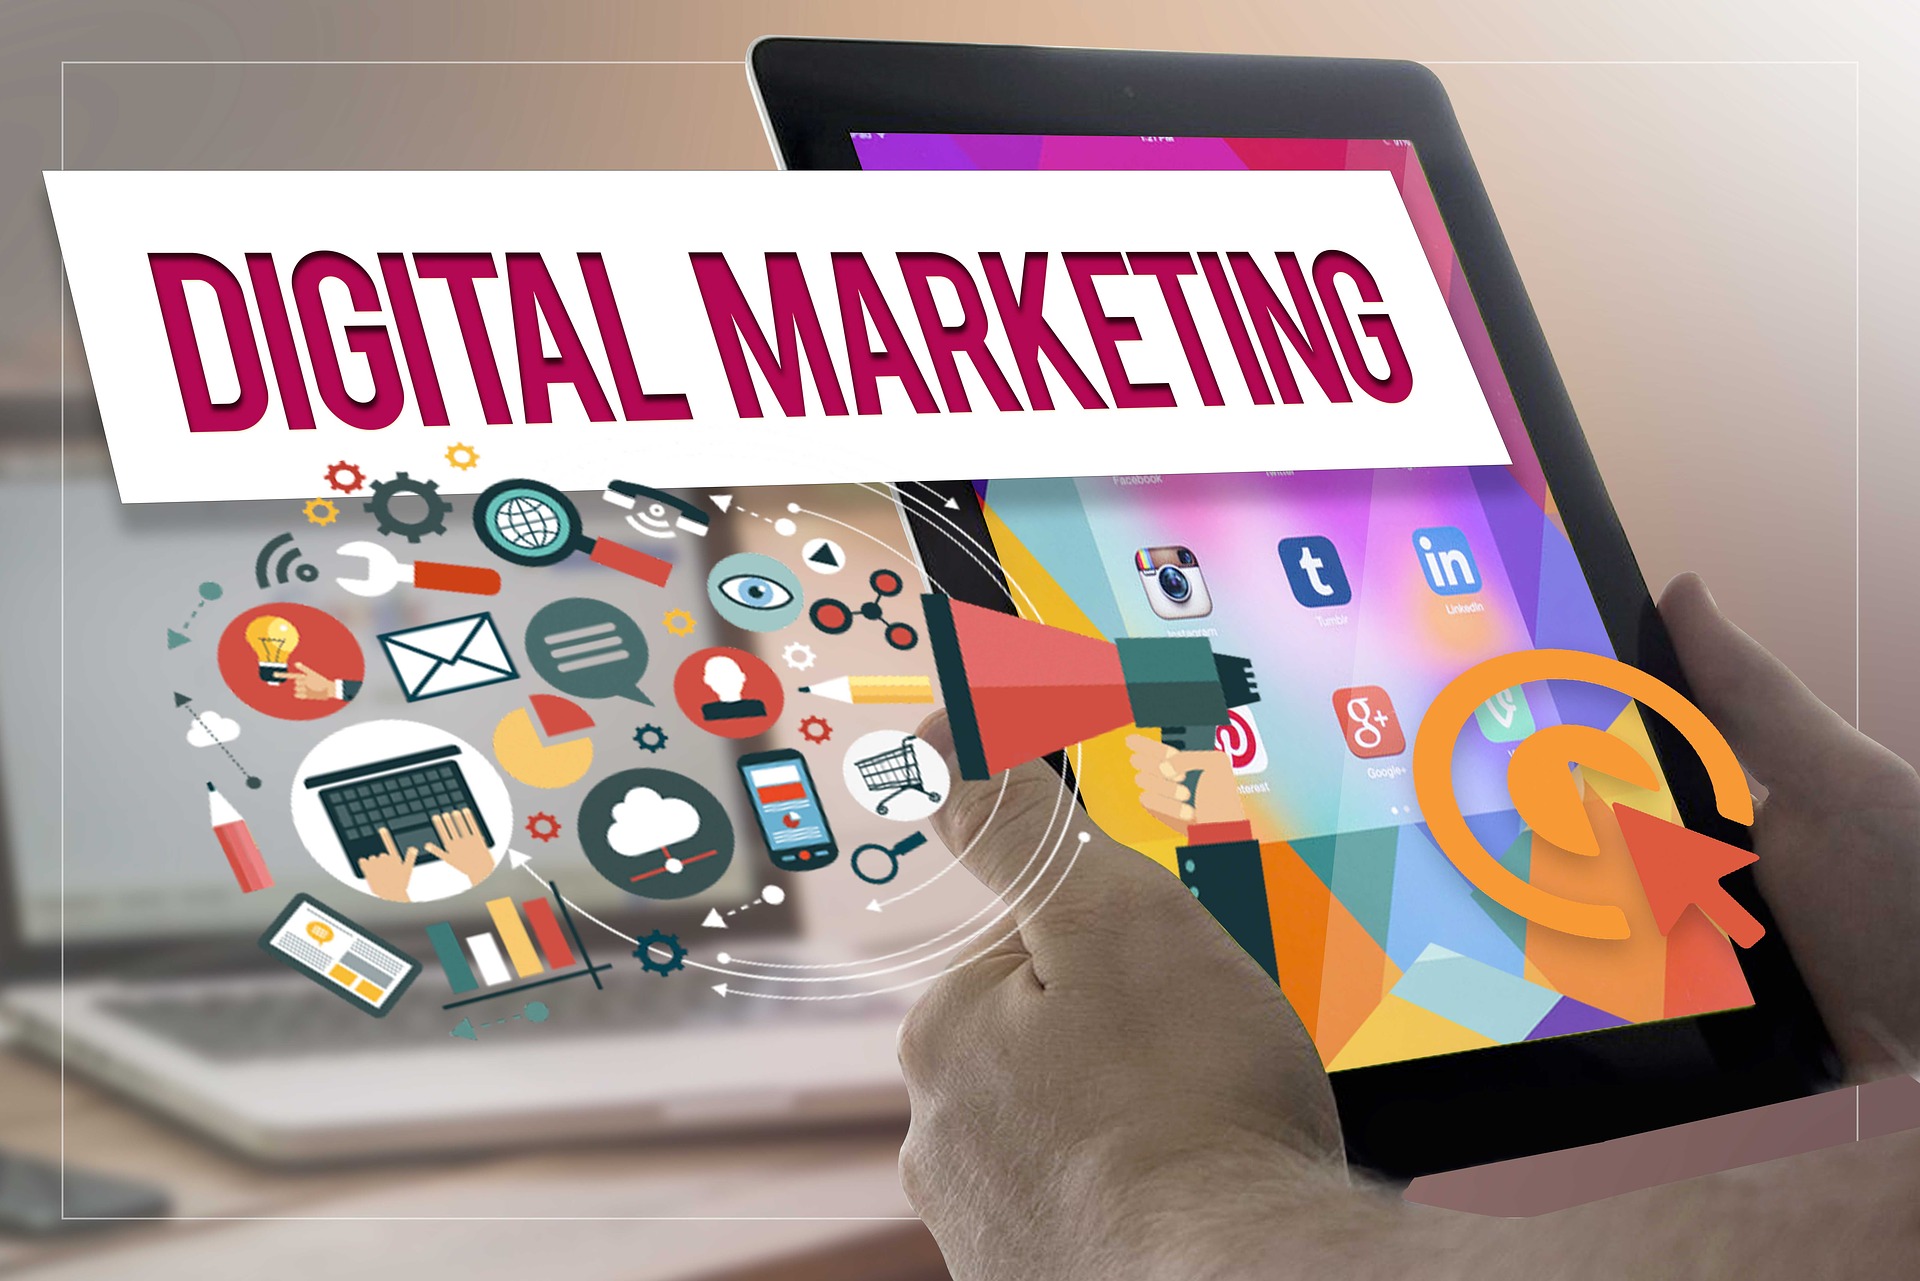 Know About SEO and Digital Marketing Services in Pakistan